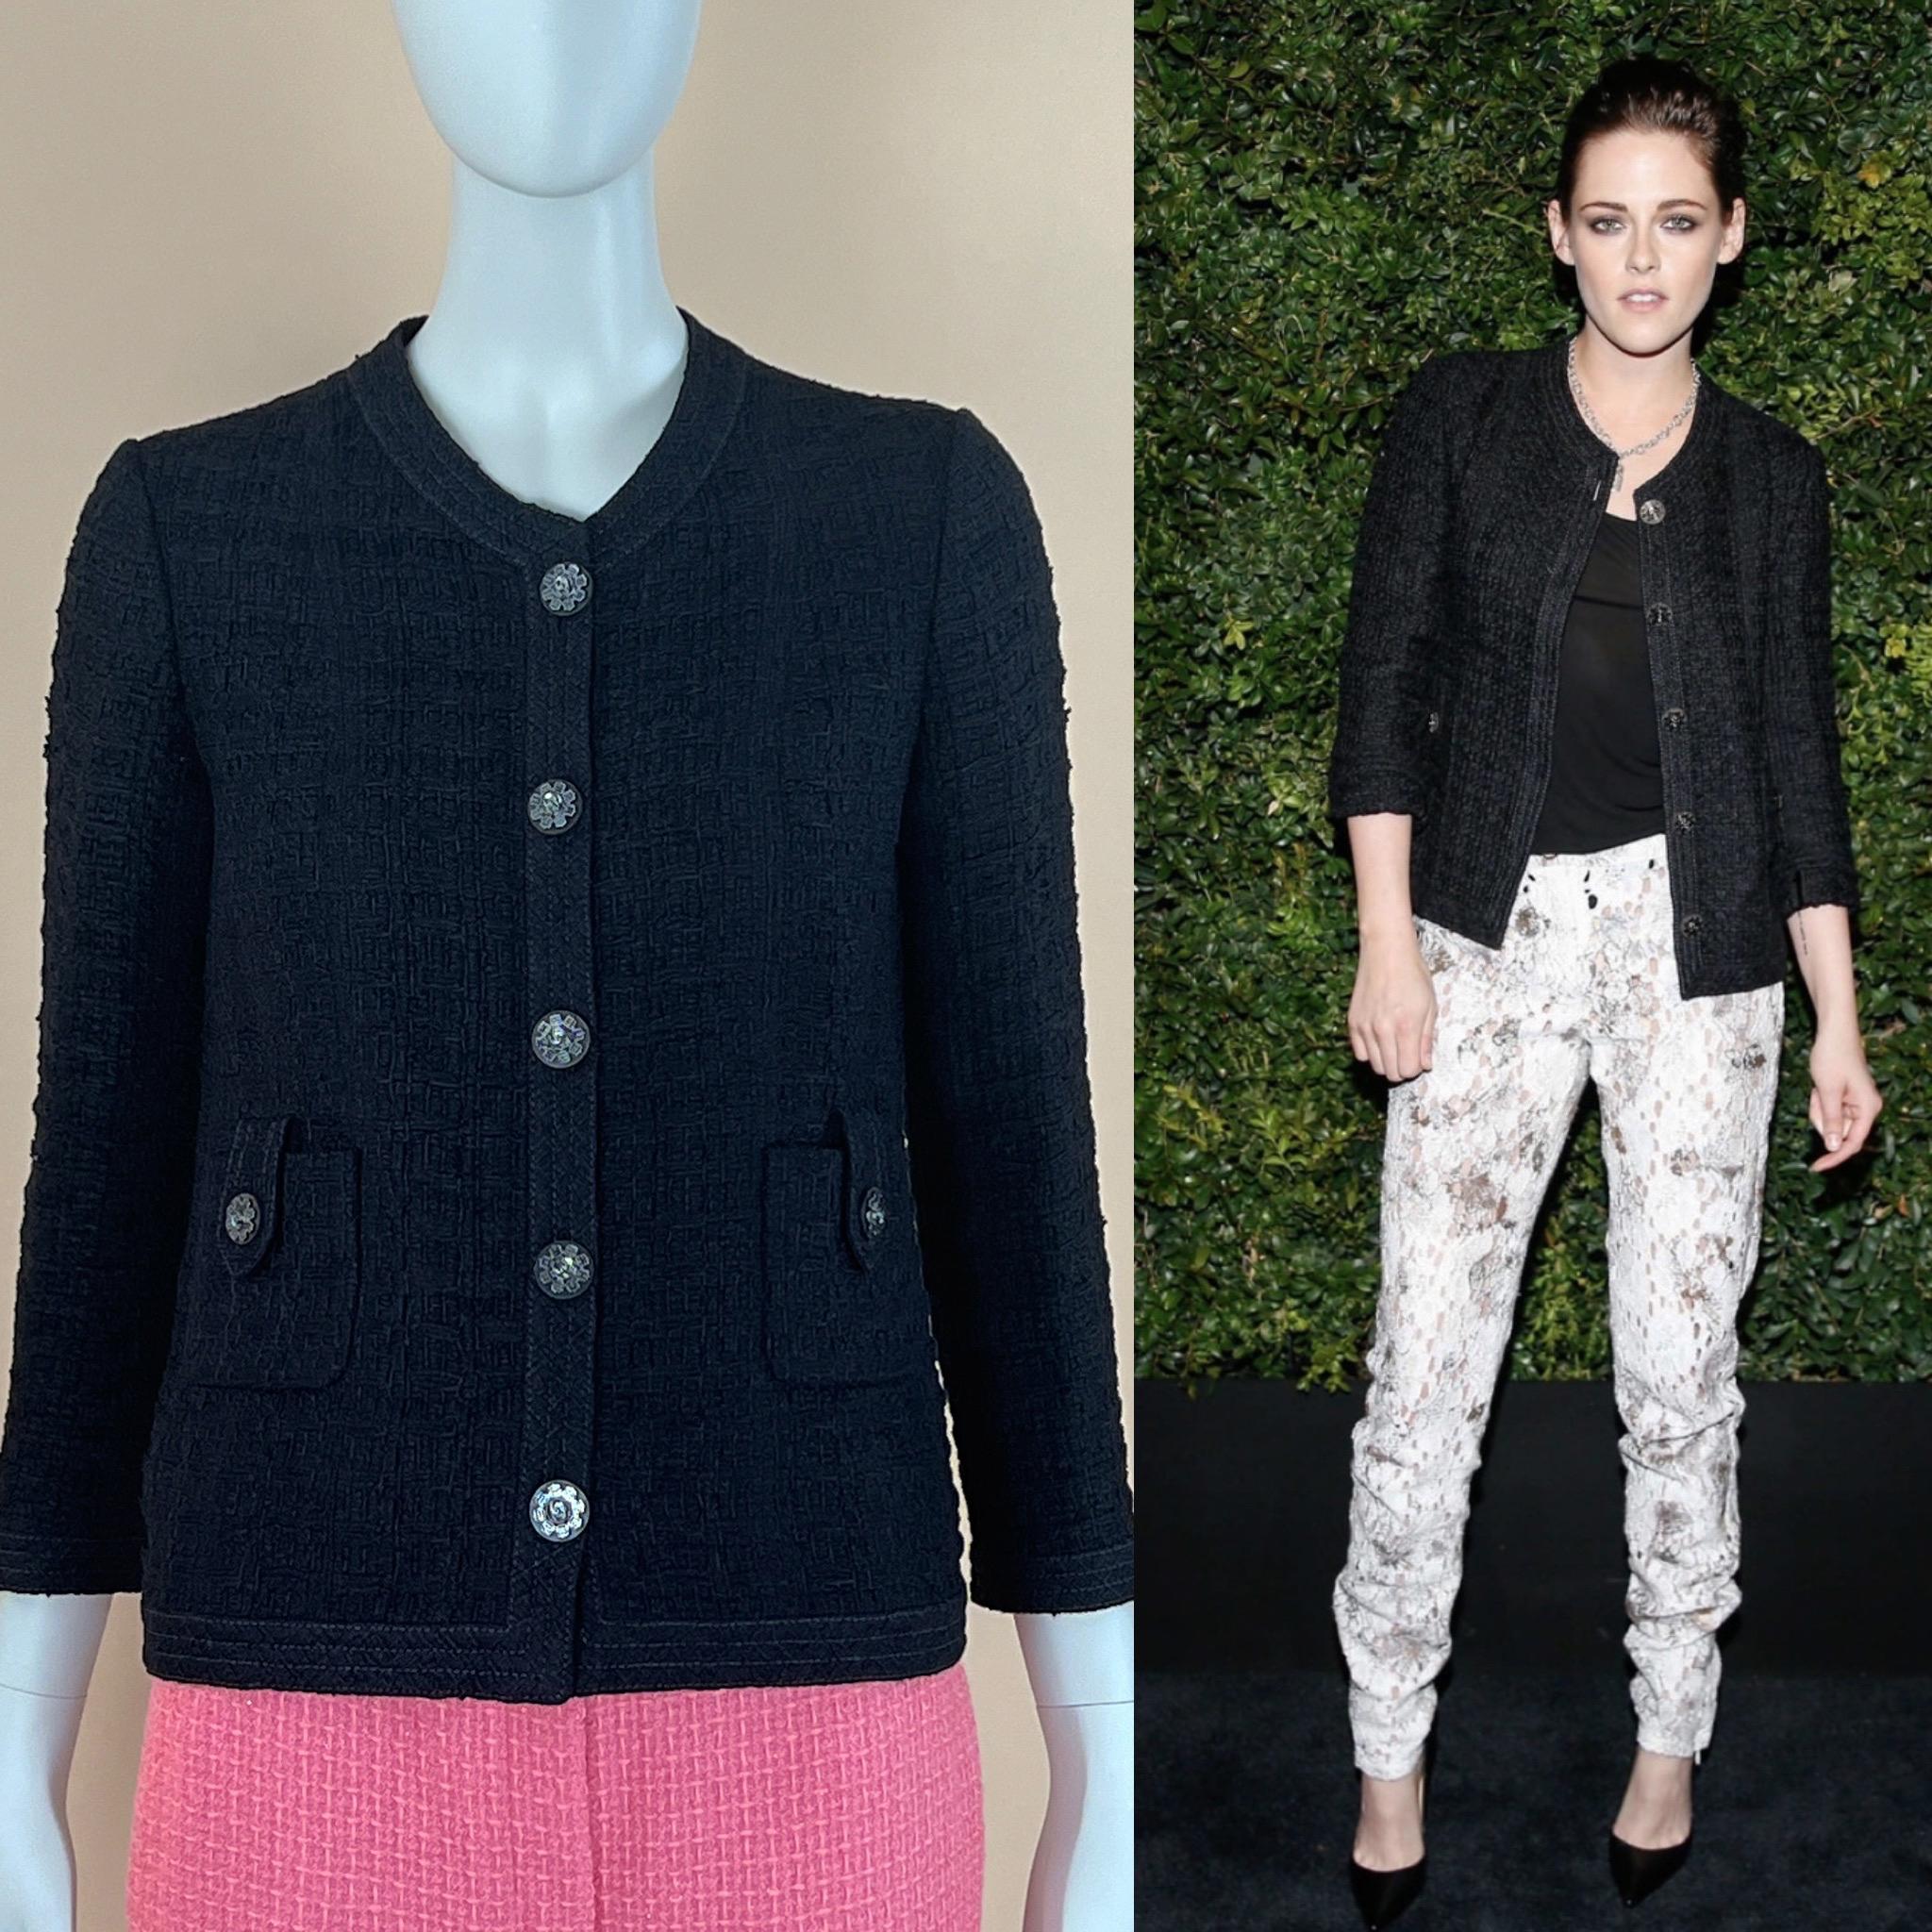 Iconic Chanel little black tweed jacket from Runway of Paris / Seoul 2015 Cruise Collection by Mr Karl Lagerfeld.
Absolutely fabulous! as seen in lots of magazines and on celebs, on Kristen Stewart. 
Rare and highly coveted piece.
Size mark 40 FR.